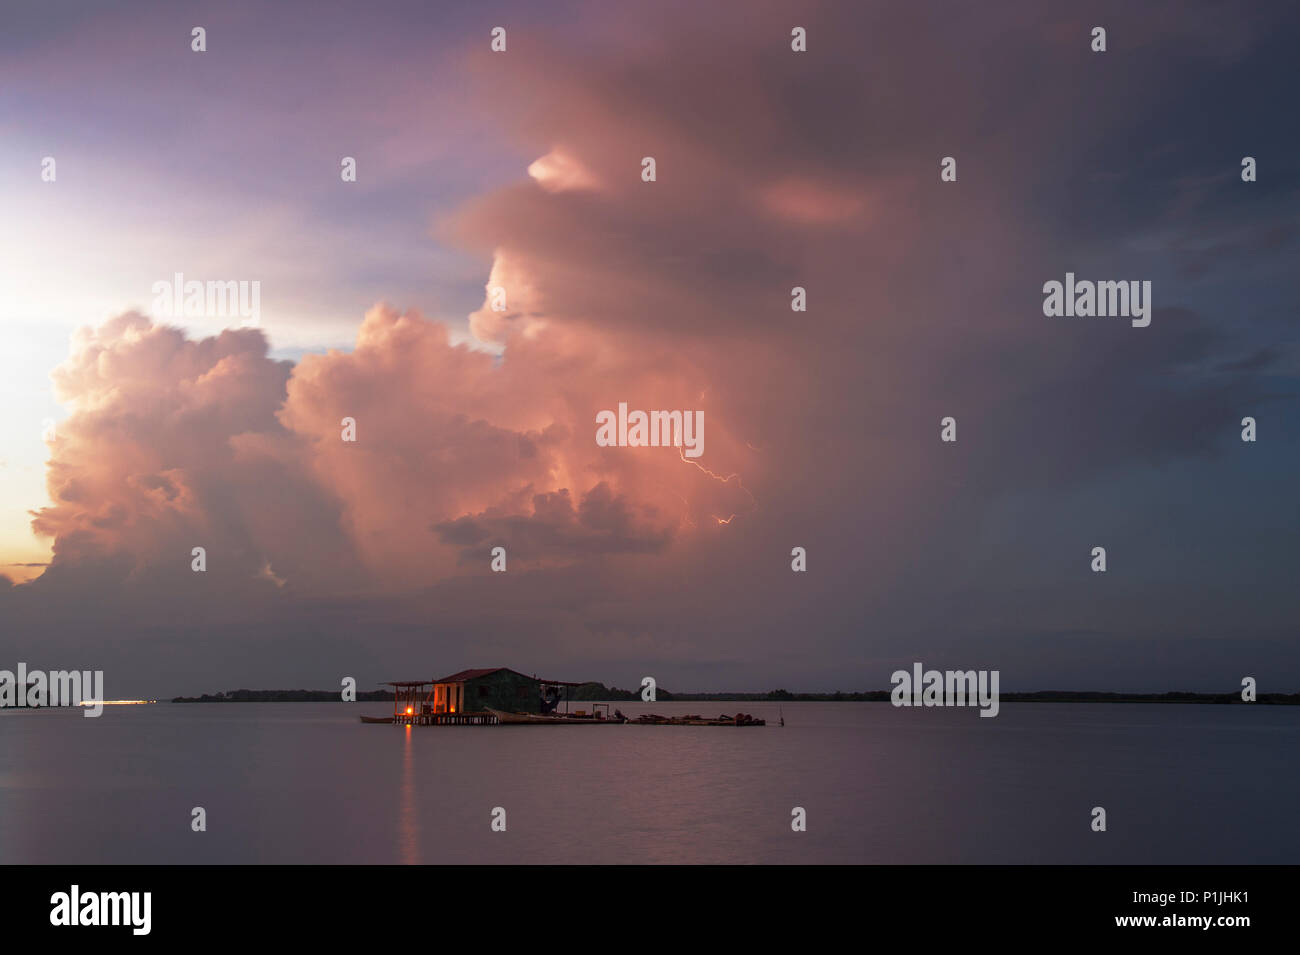 Multicell storm with staggered updrafts in the glowing light of the sunrise over lake Maracaibo (Catatumbo thunderstorm, the place with the highest lightning density worldwide), Ologa, Zulia, Venezuela, South America Stock Photo